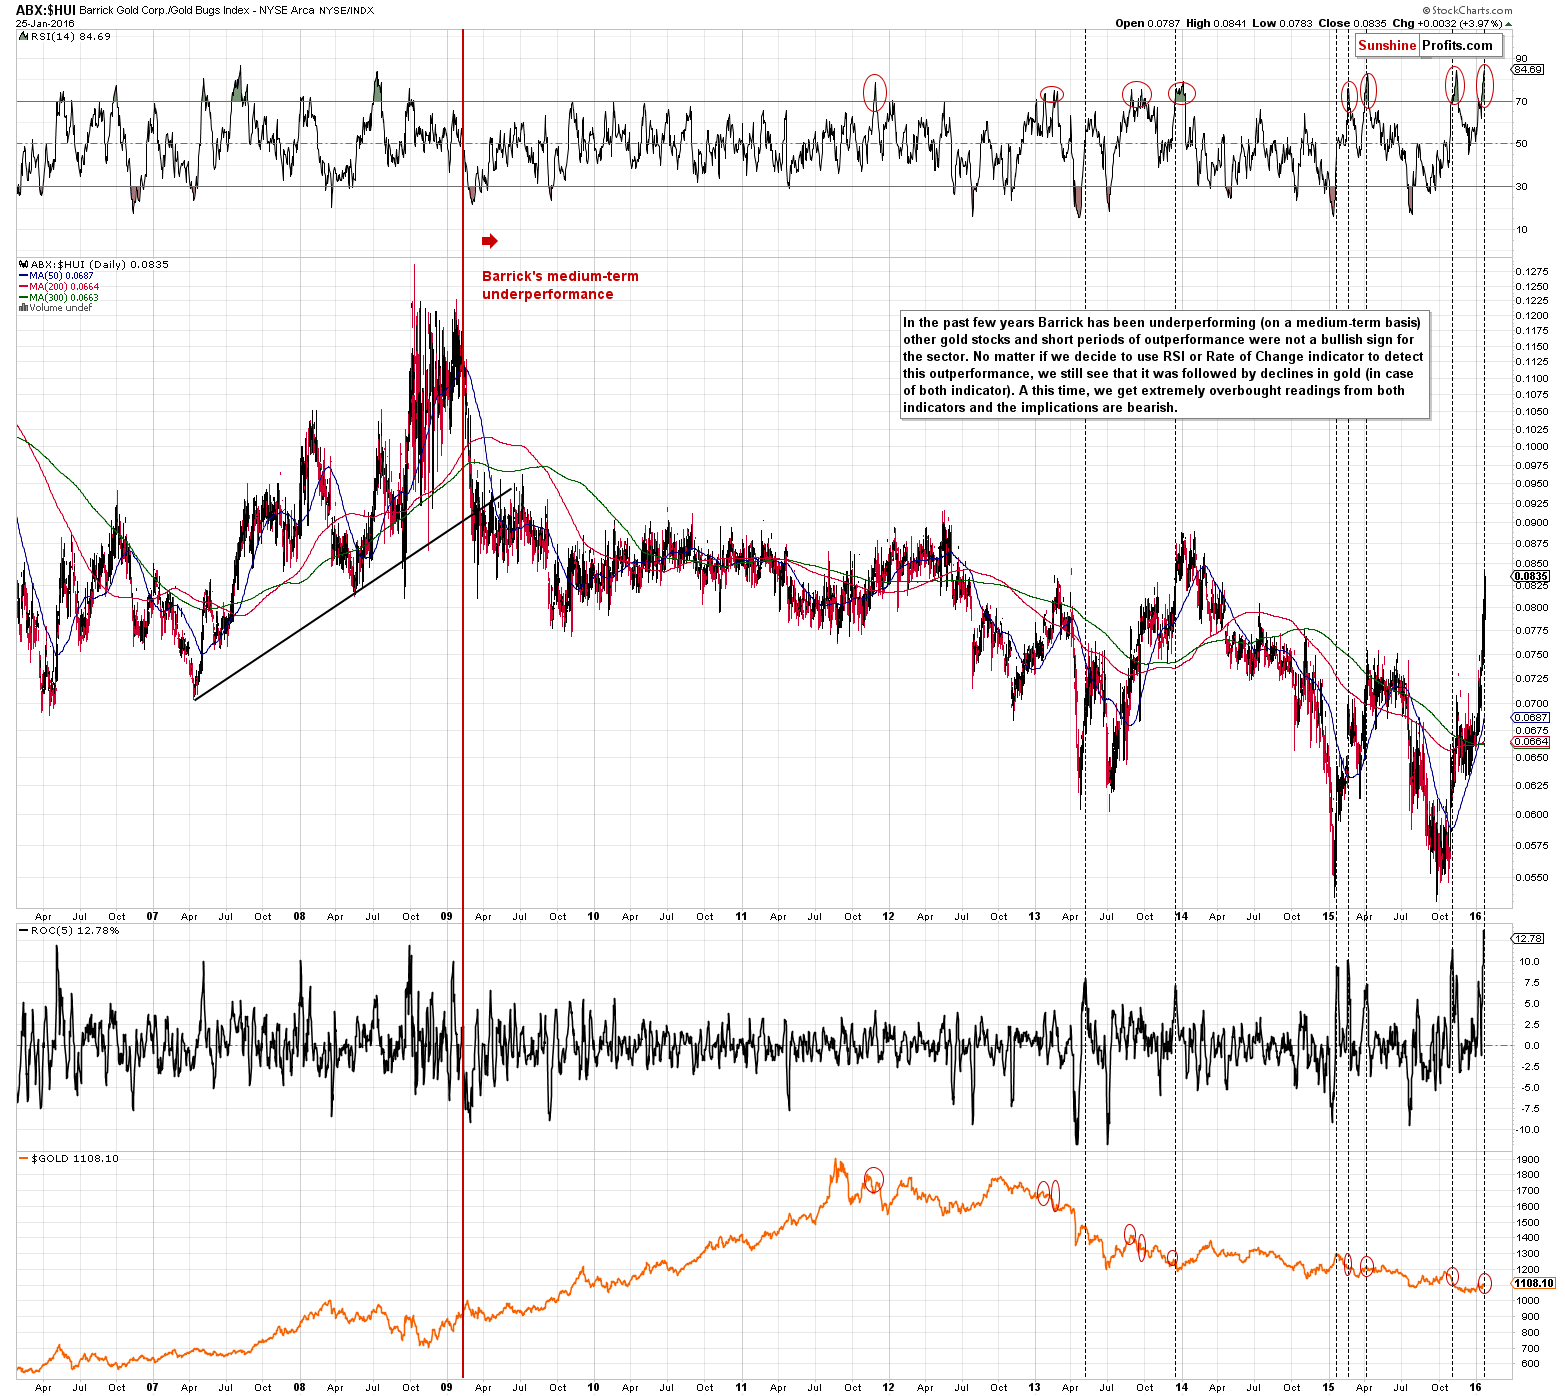 ABX:HUI - Barrick Gold (ABX) to gold stocks ratio chart